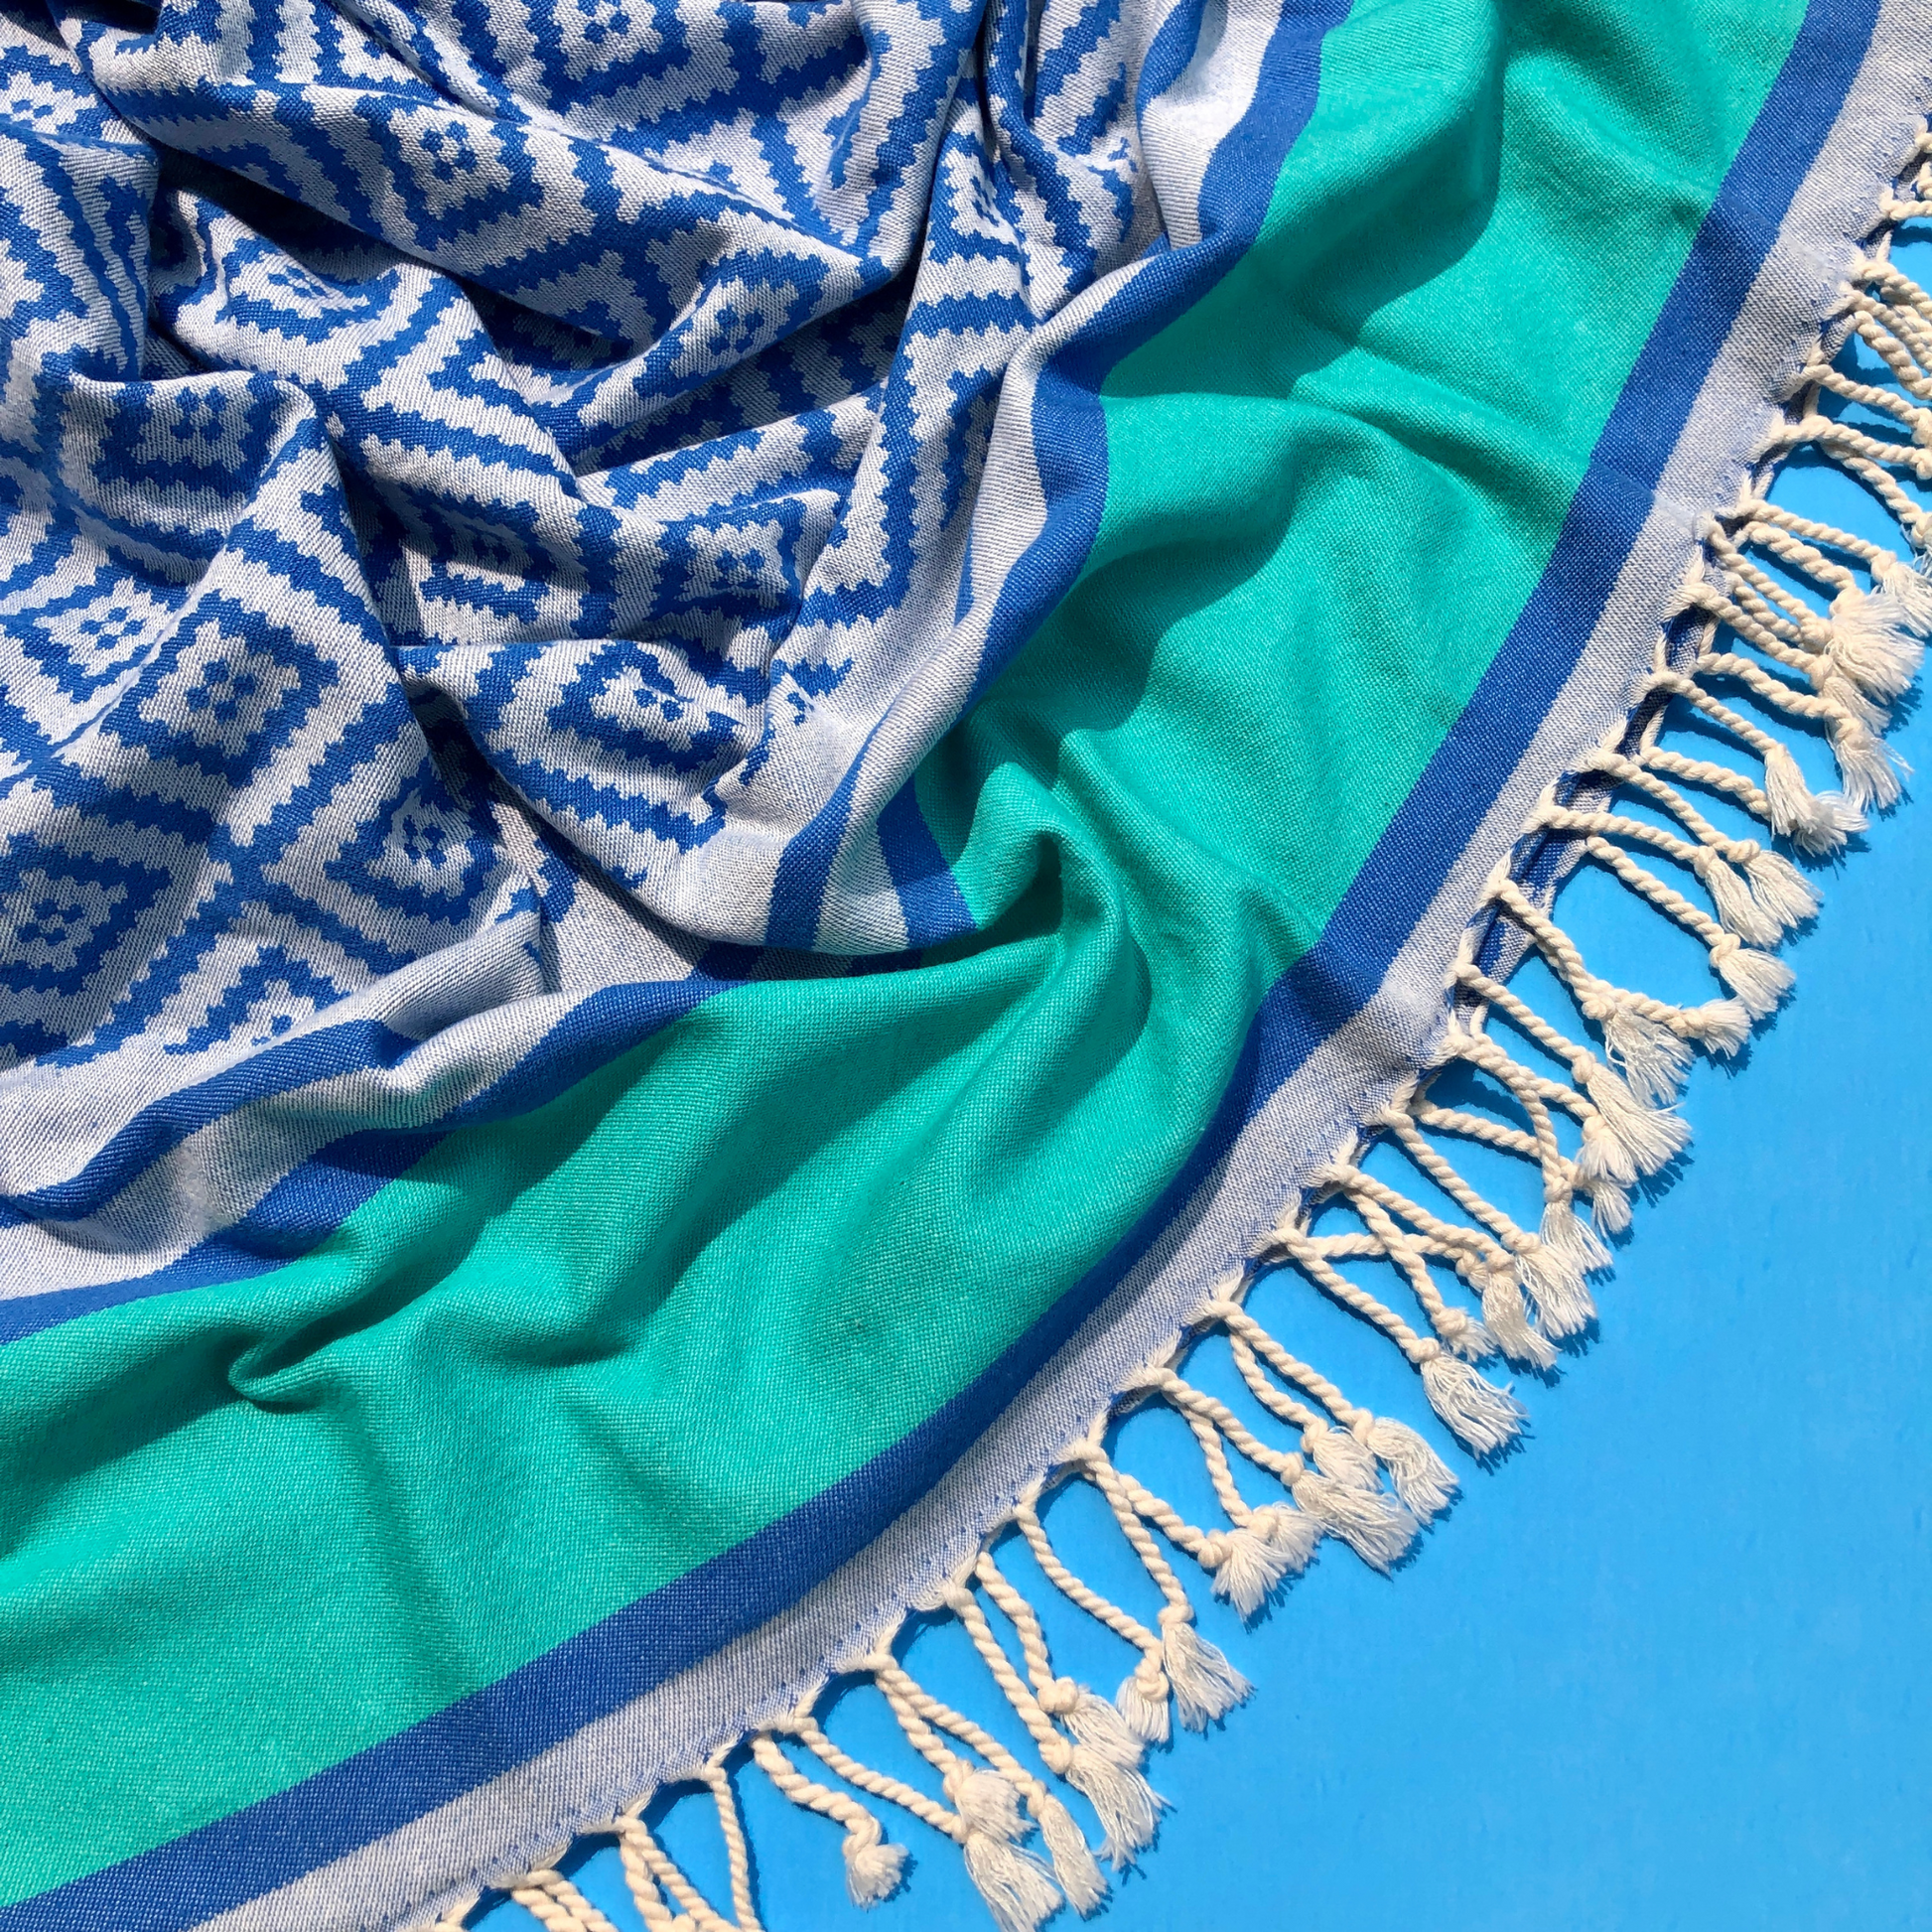 DIVAN Turkish bath & beach towel with cobalt blue pattern and a wide teal green stripe on one end